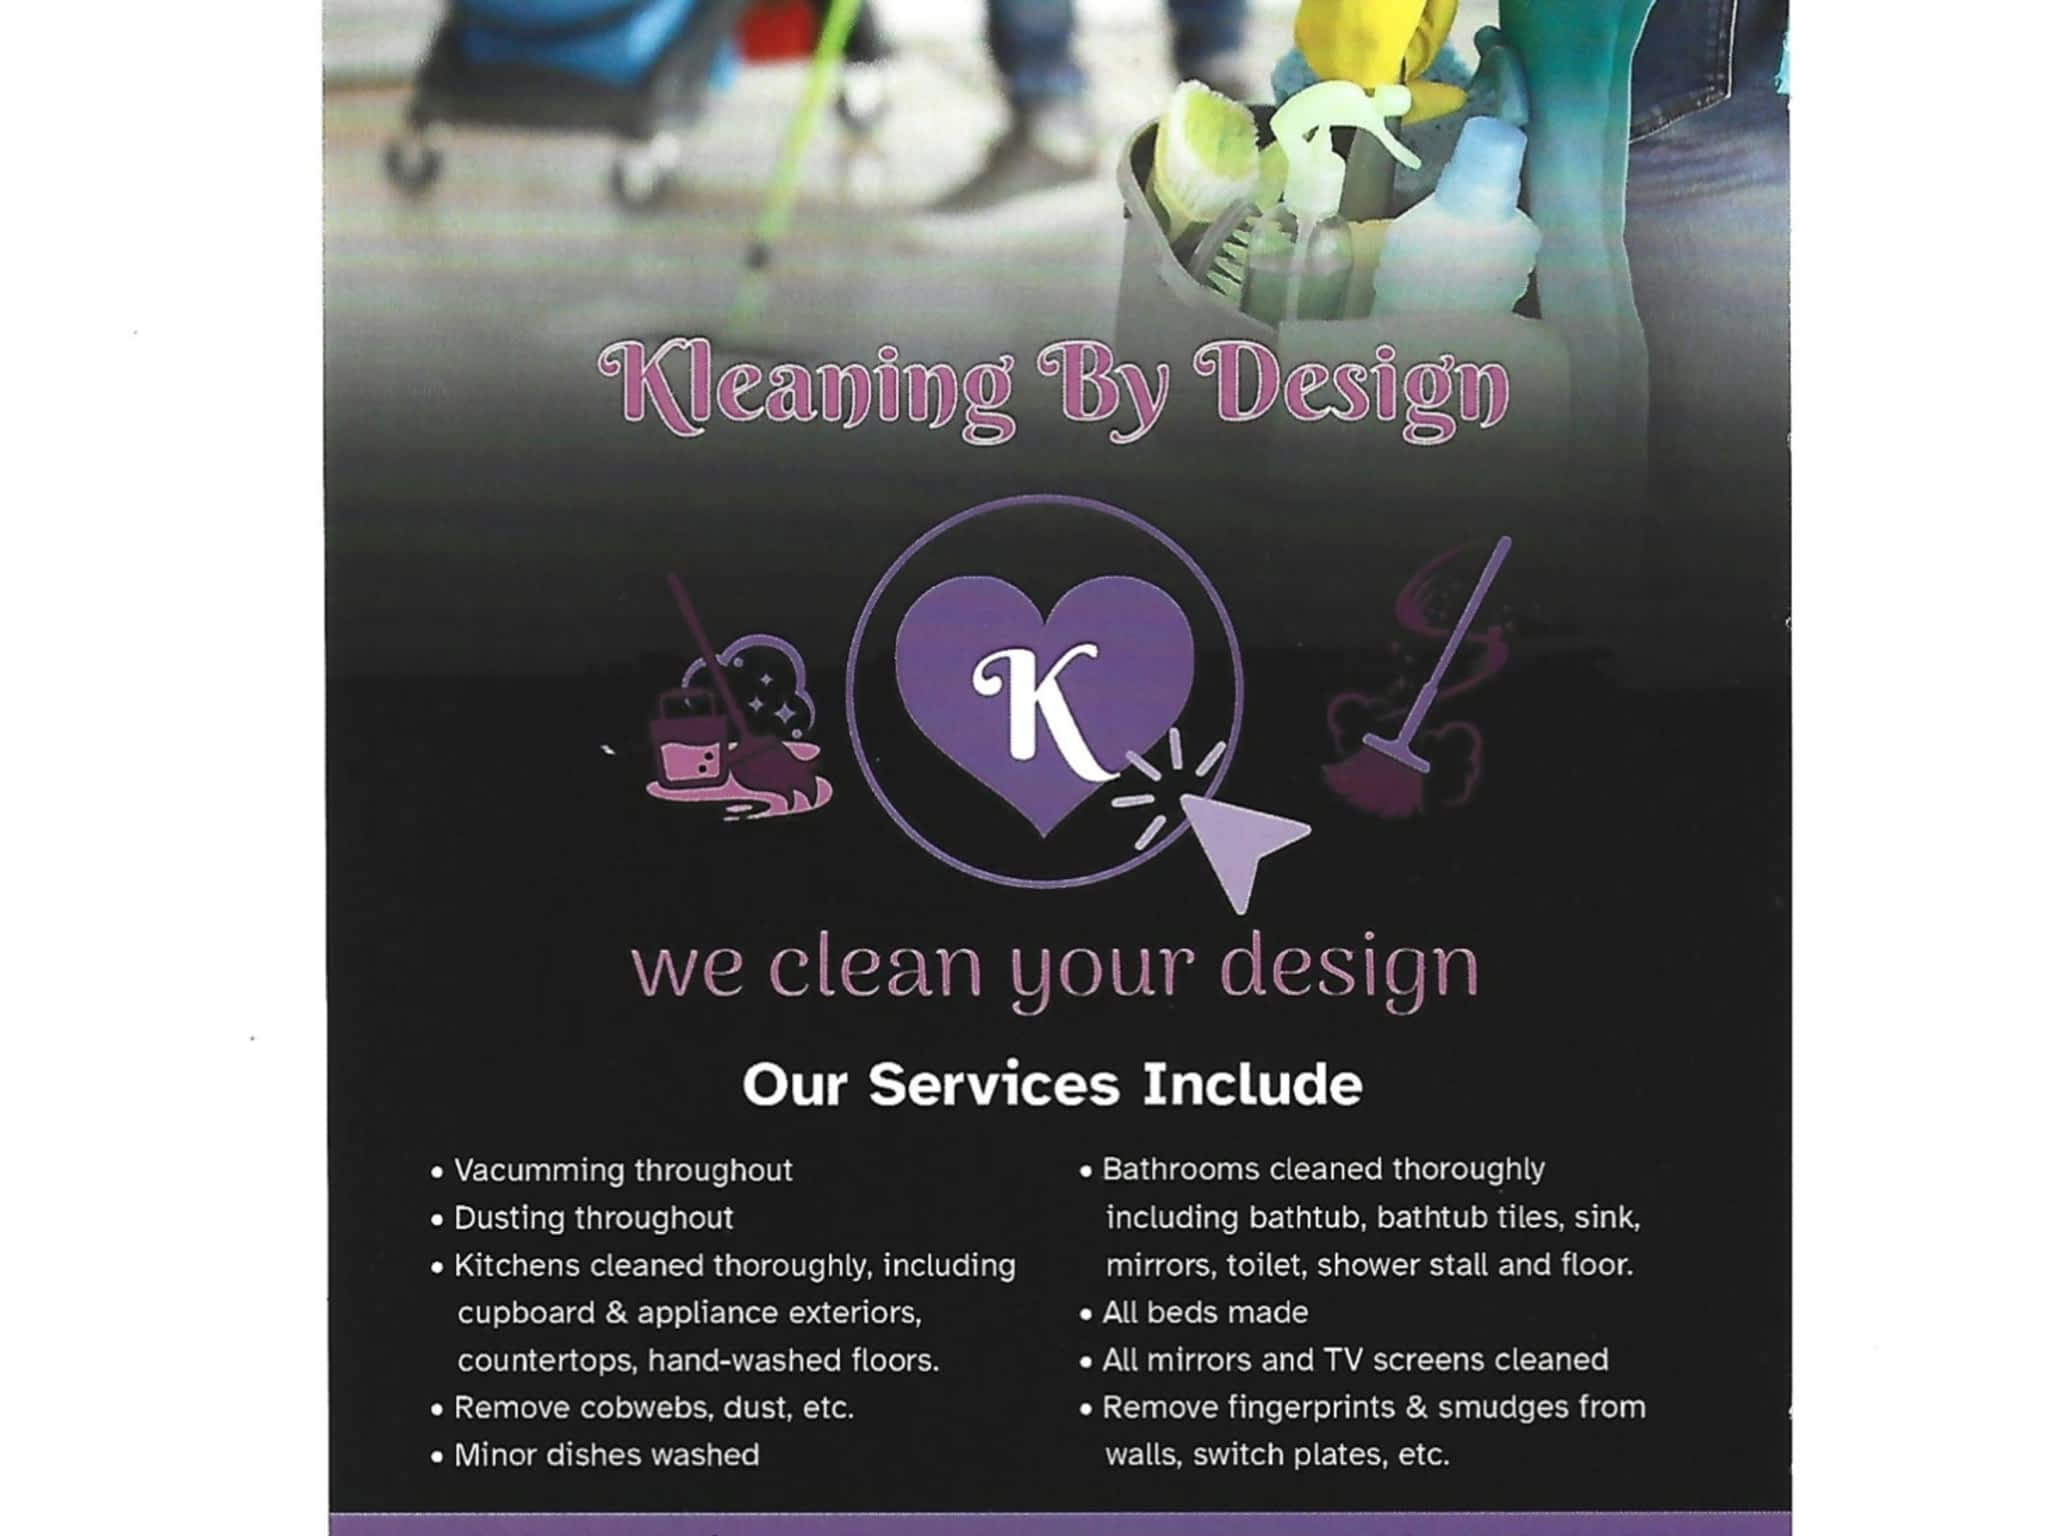 photo Kleaning By Design